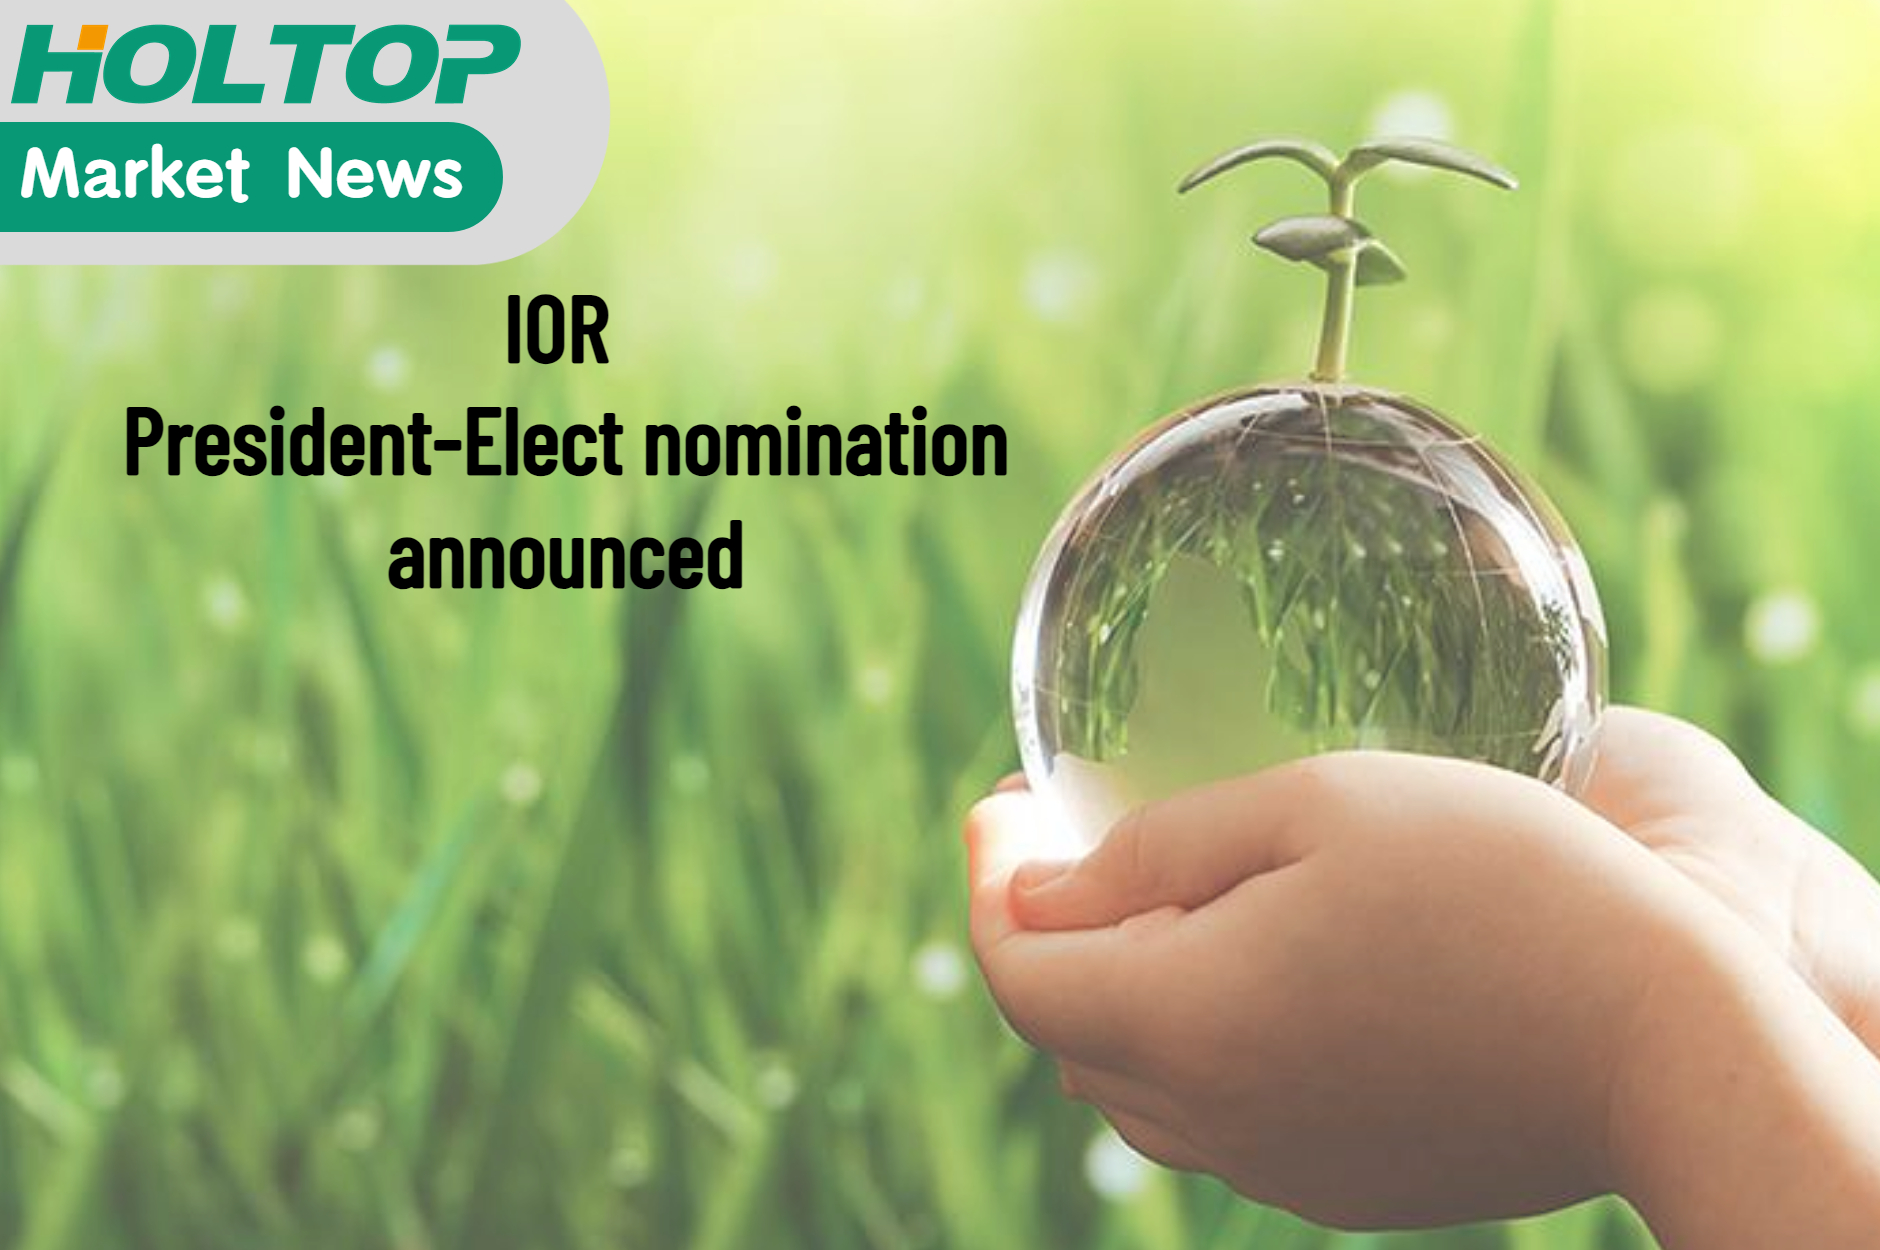 IOR President-Elect nomination announced